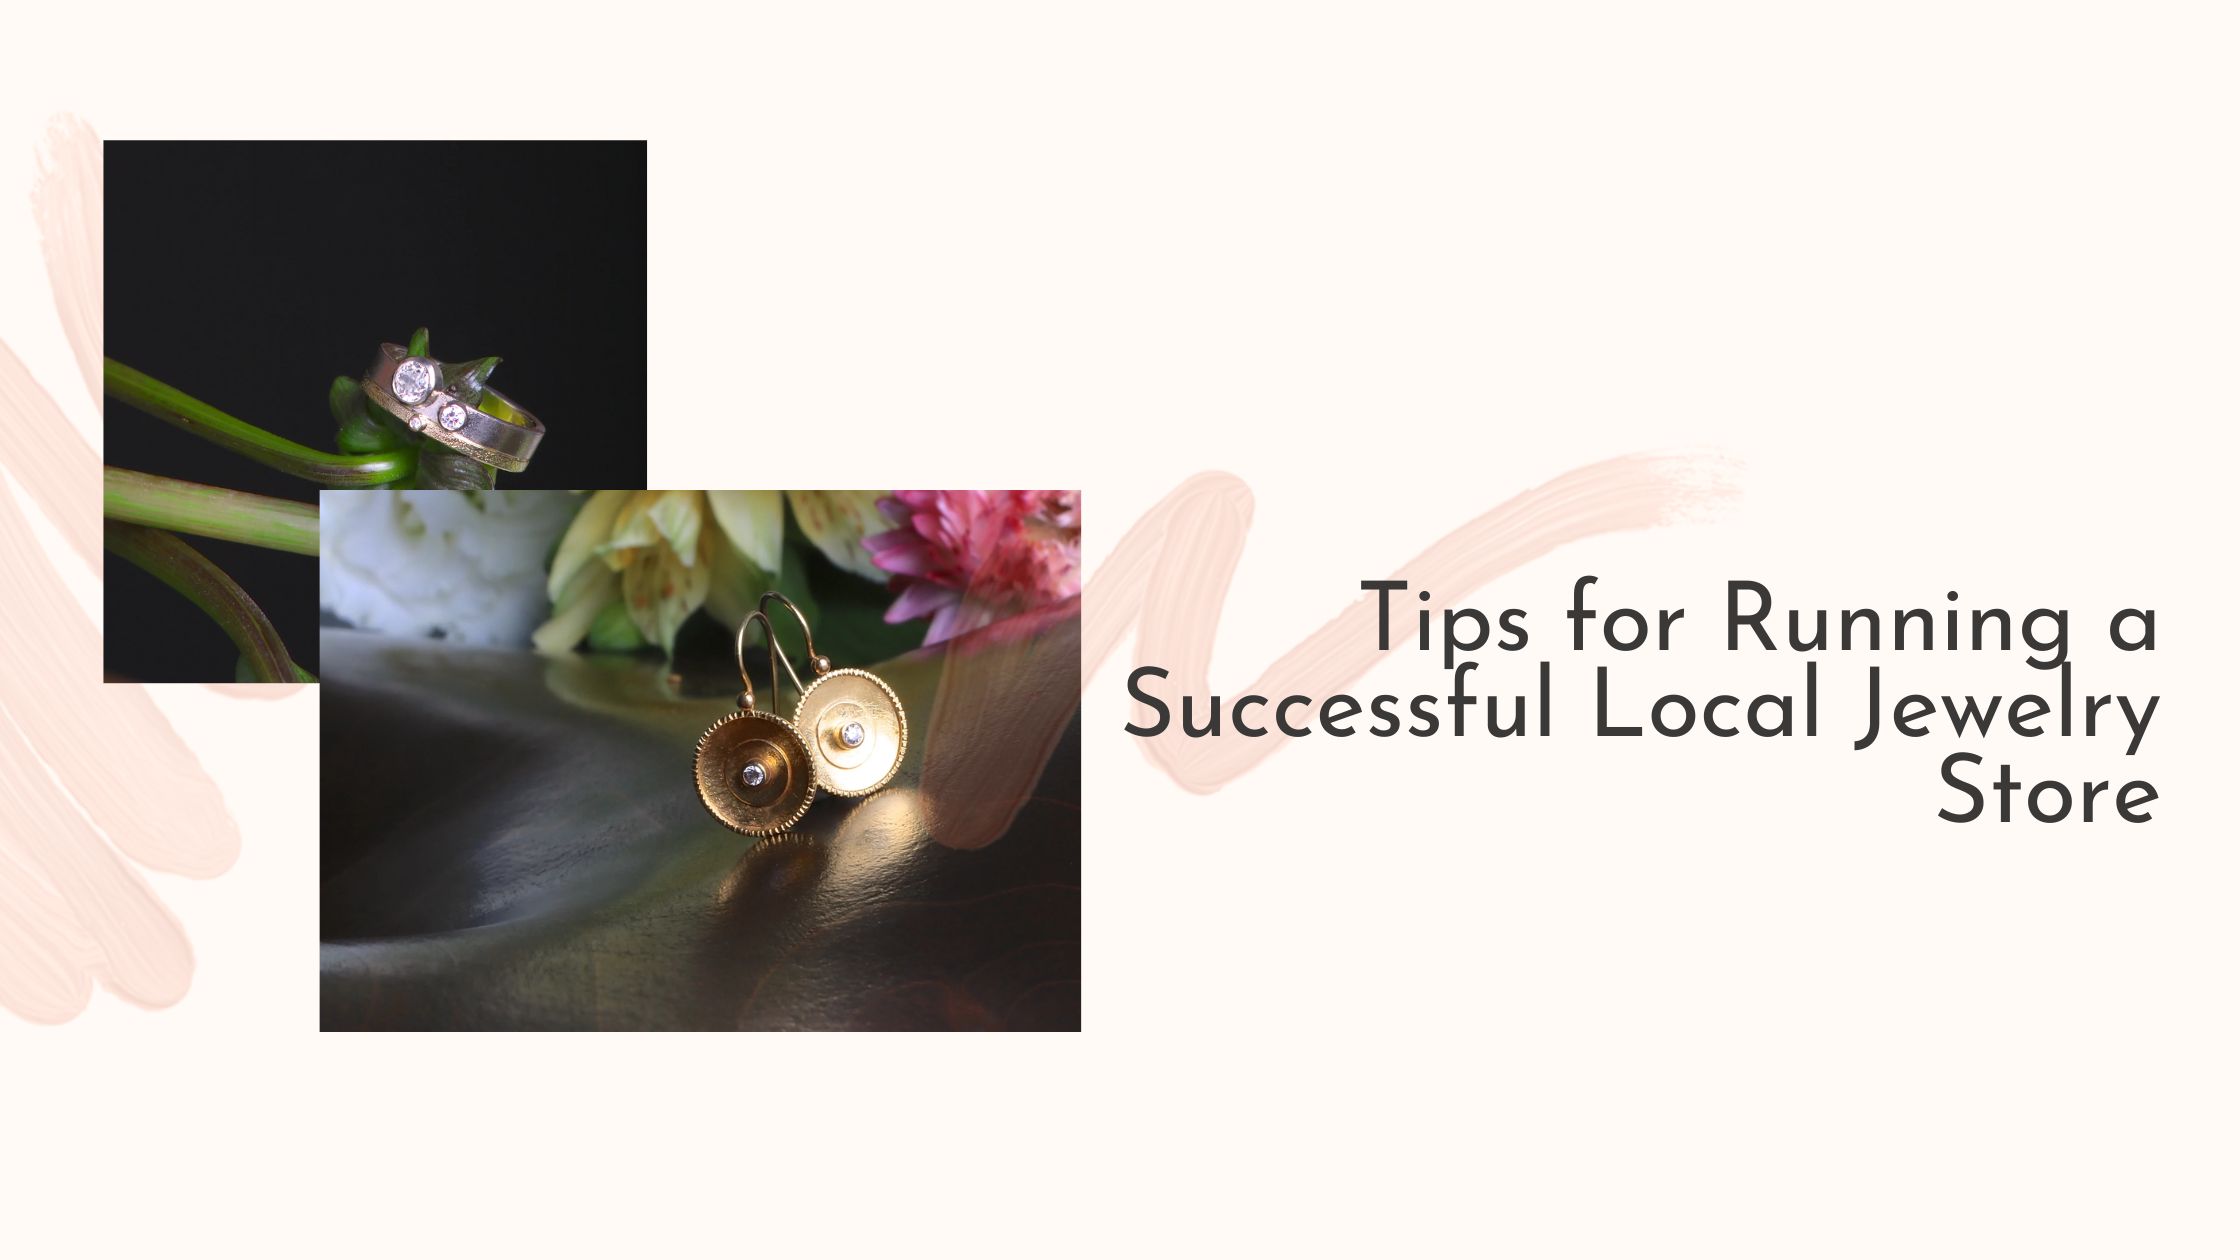 Tips for Running a Successful Local Jewelry Store